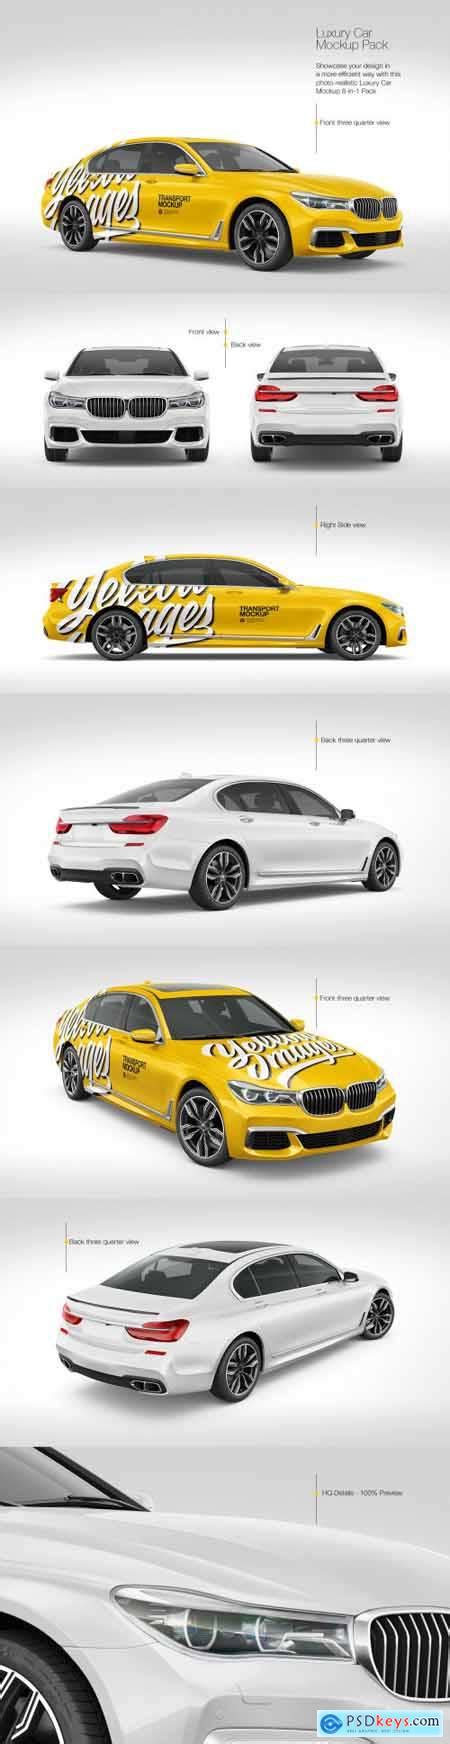 Luxury Car Mockup Pack 69771 Free Download Photoshop Vector Stock